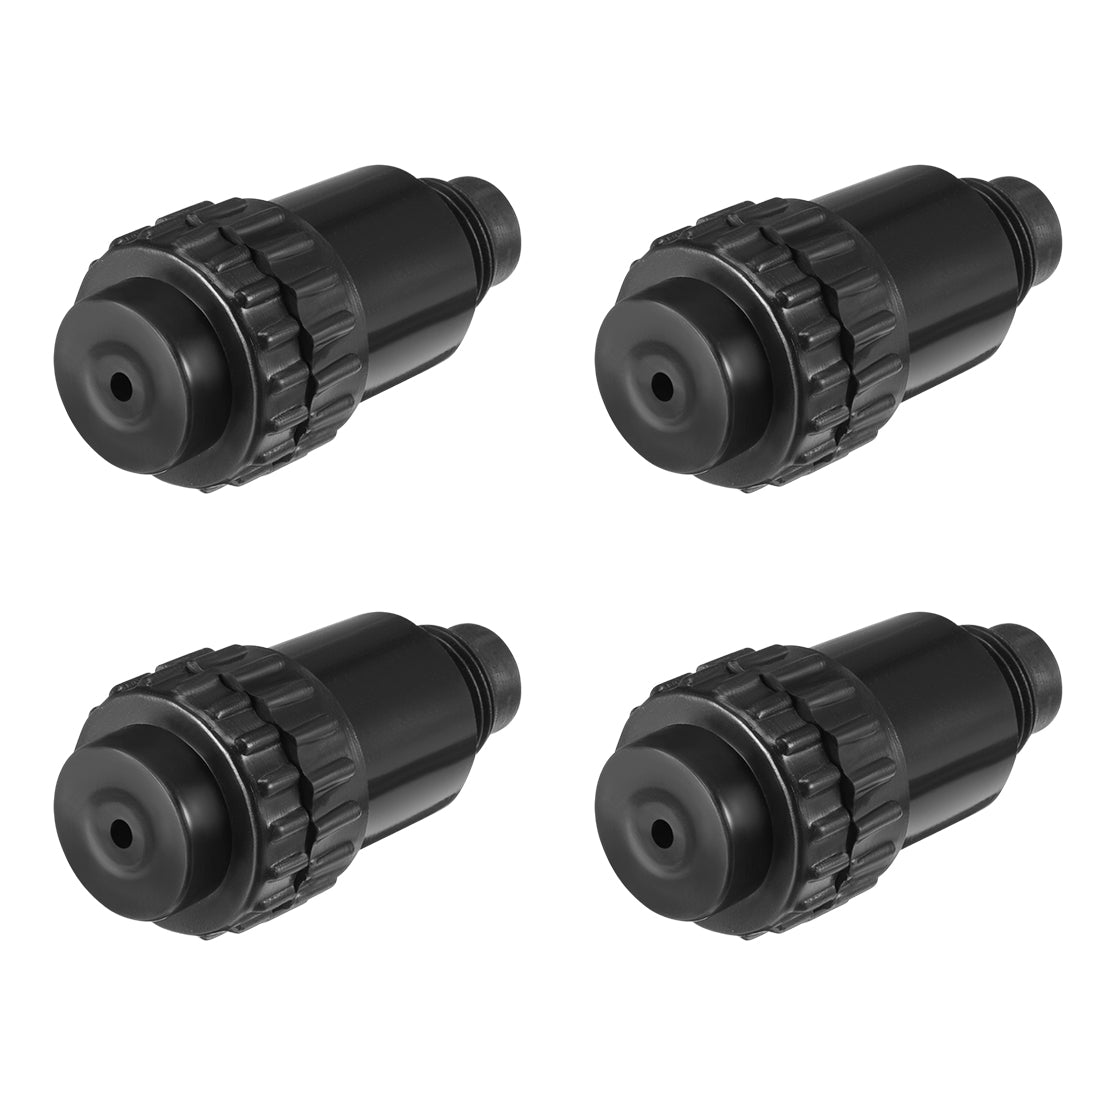 uxcell Uxcell 3/8BSP Thread Diameter Oil Plug Connector Air Compressor Spare Fittings Black 4 pcs